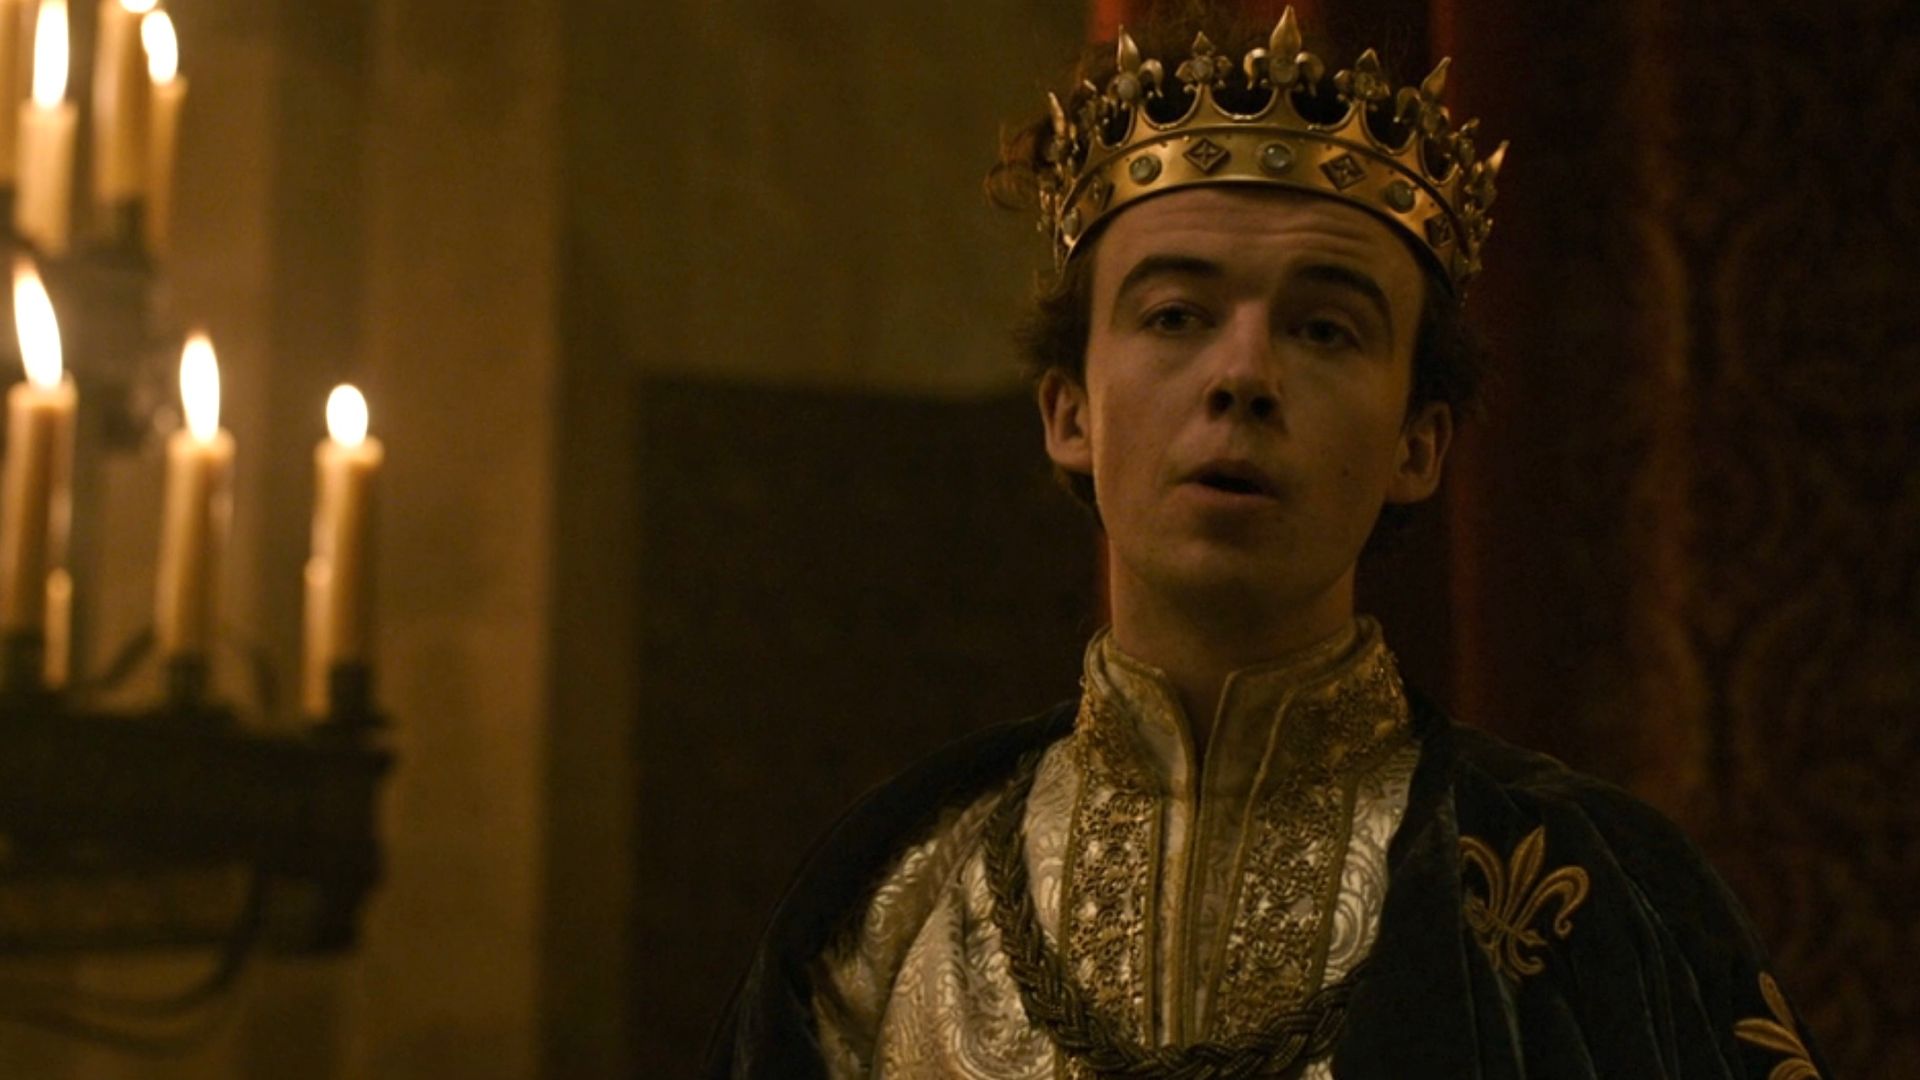 Alex Lawther in 'The Last Duel'